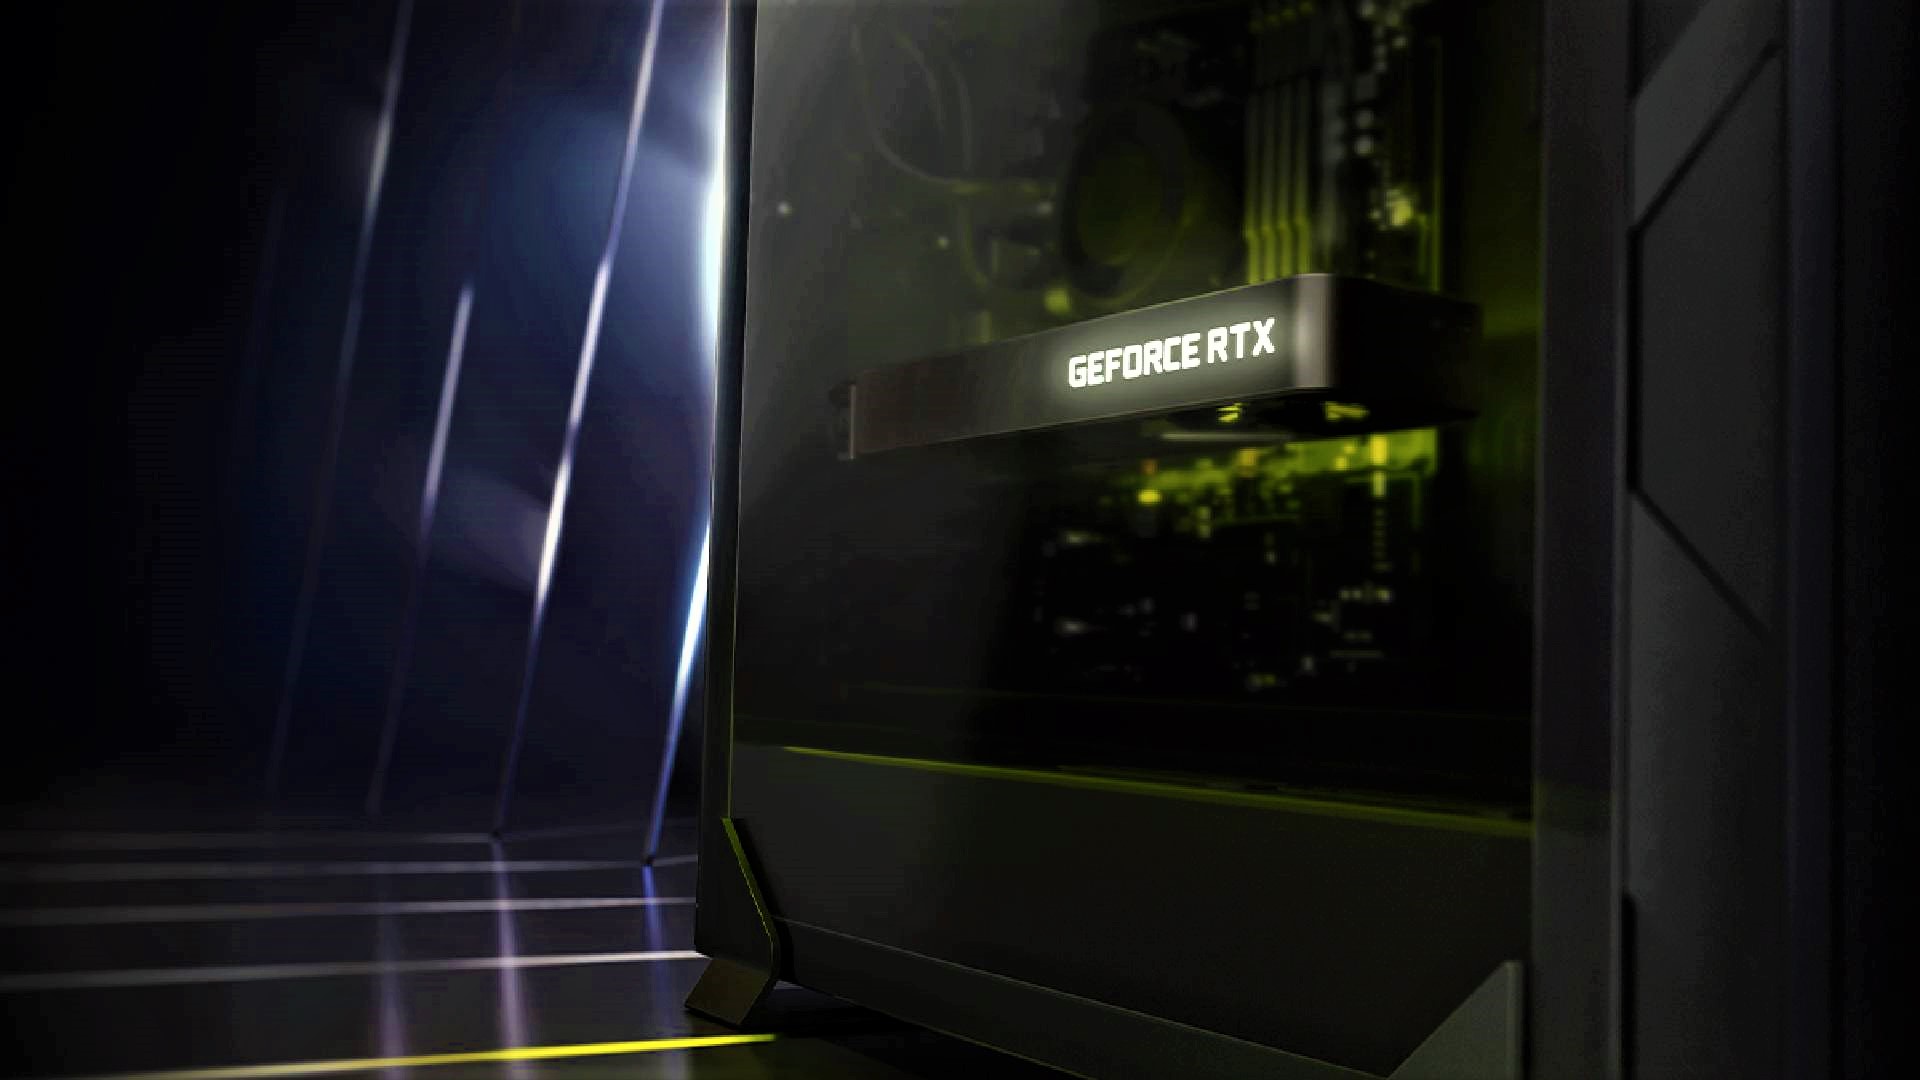 Nvidia’s GeForce RTX 3050 graphics card might actually be obtainable at launch